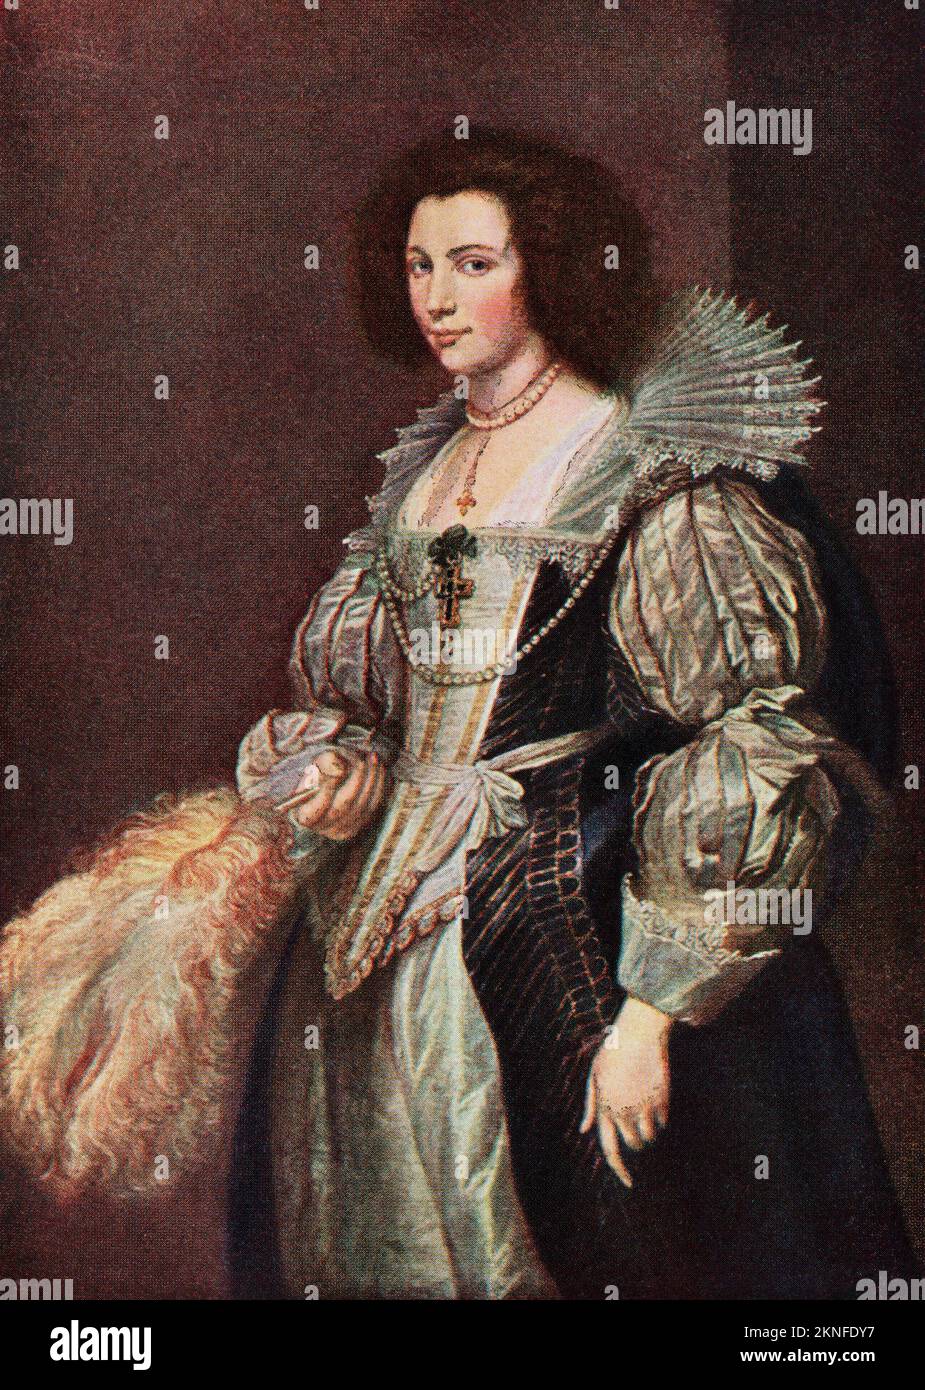 Maria Louis de Tassis,1611-1638, daughter of canon Antoine de Tassis, after the painting by Anthony van Dyke.  From Modes and Manners, published 1935. Stock Photo